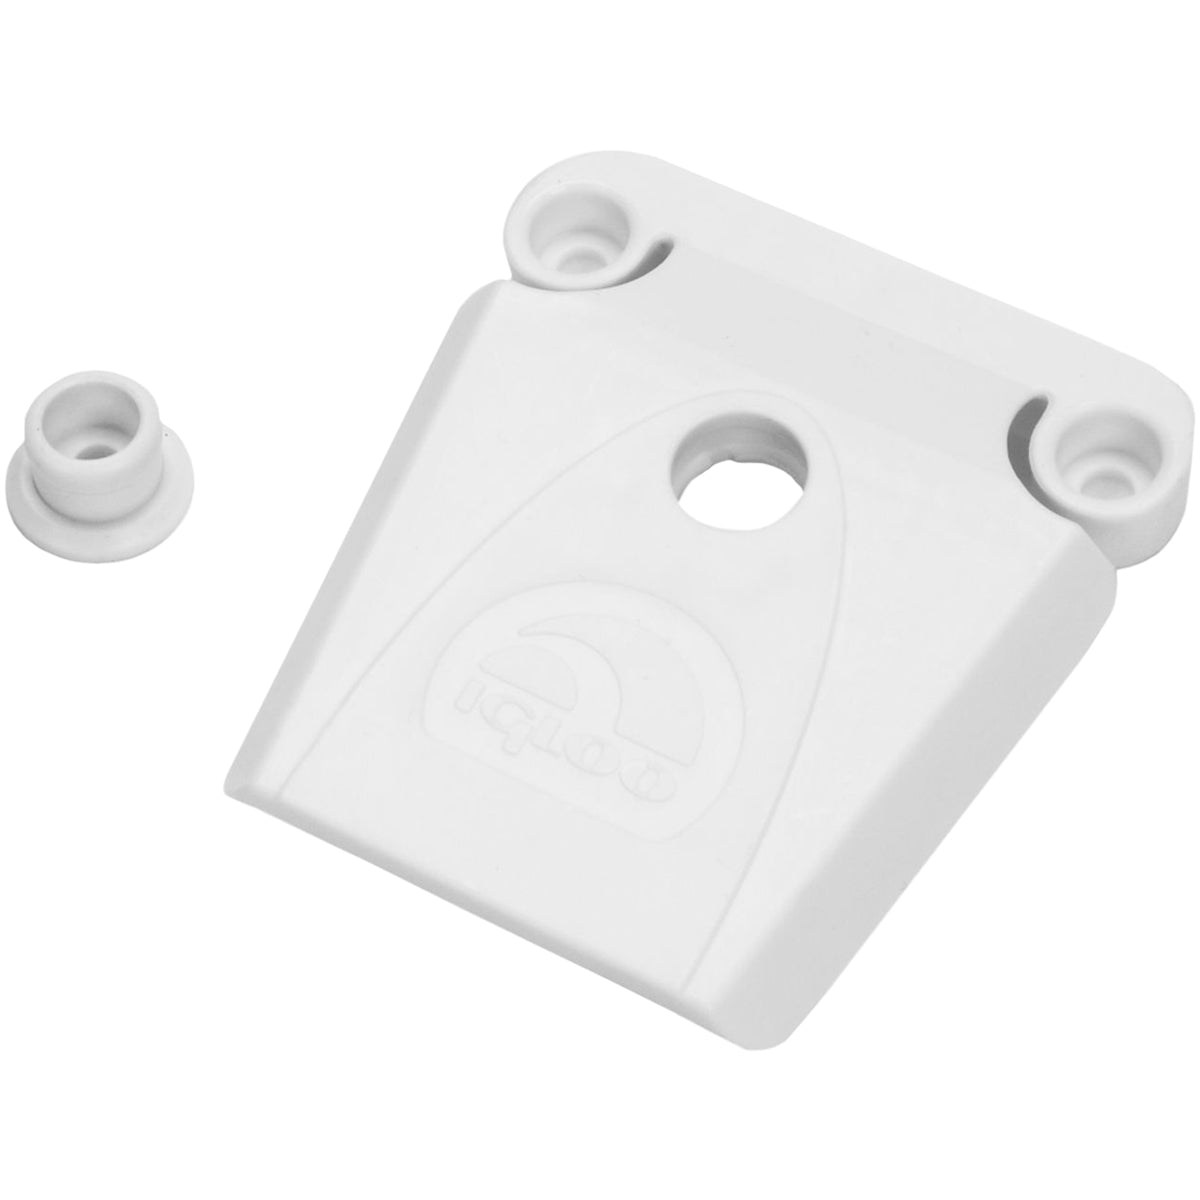 IGLOO Replacement Plastic Cooler Latch - White IGLOO